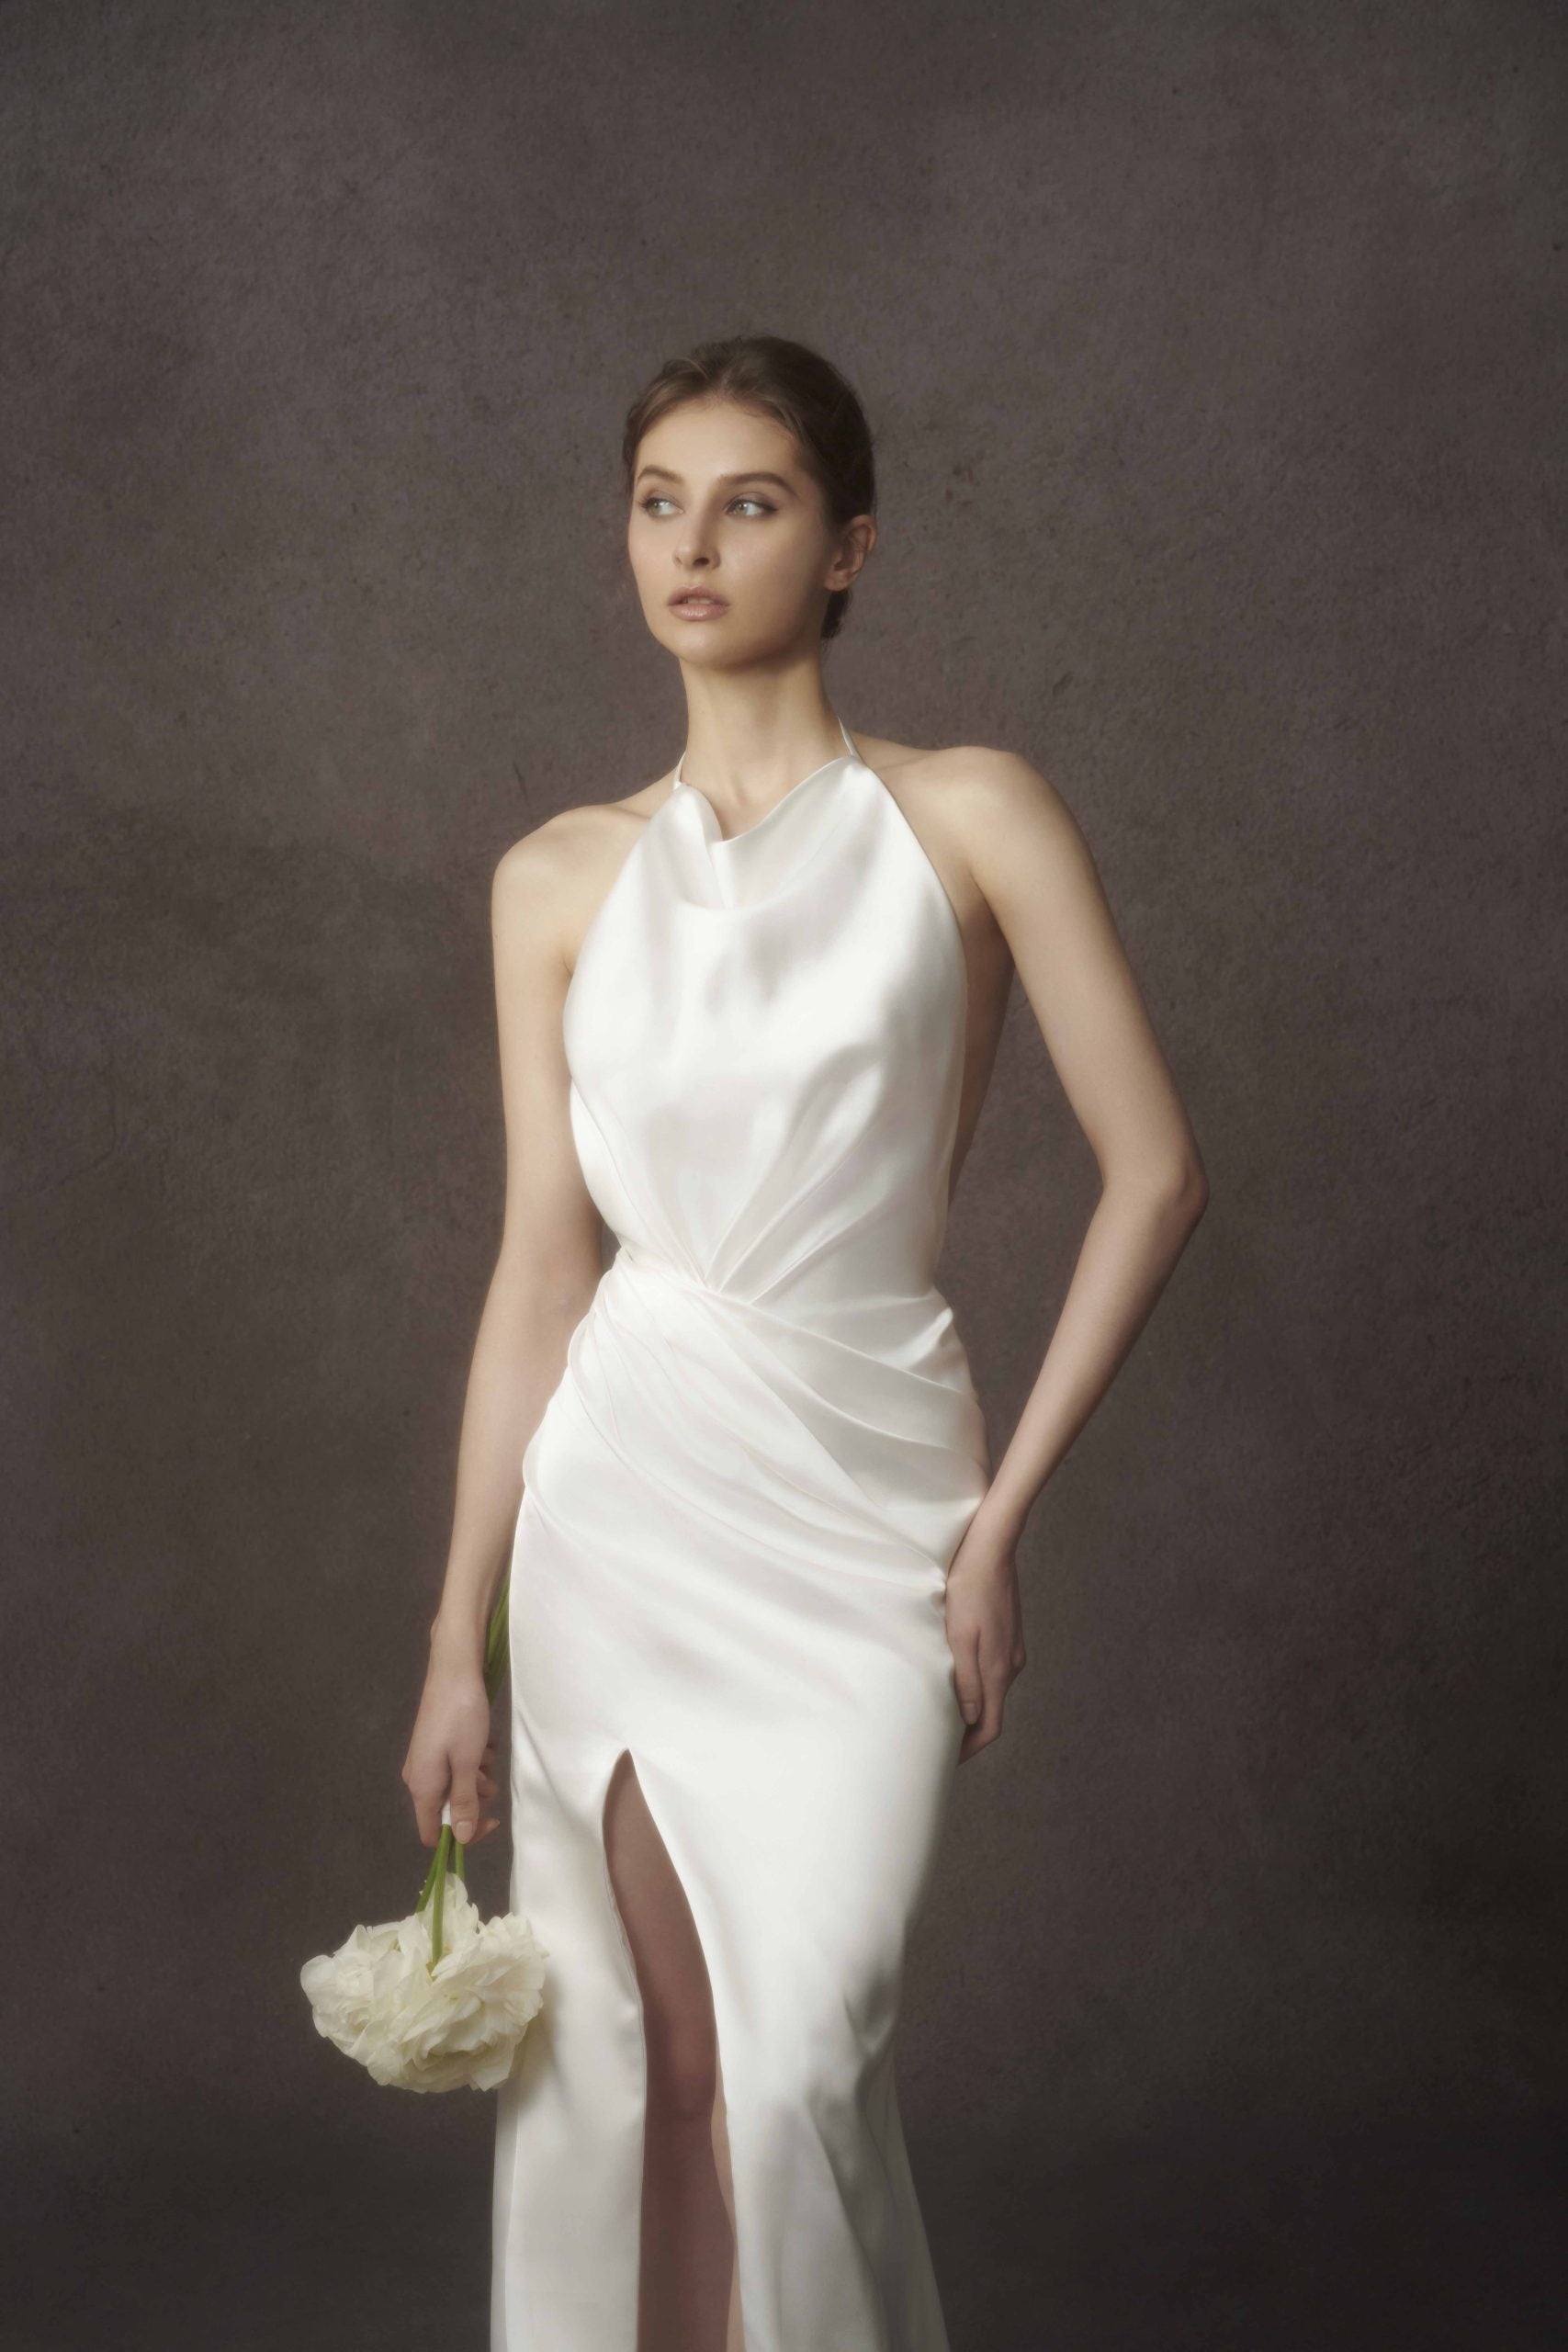 Halter Dress With Side Slit by Nicole + Felicia - Image 3